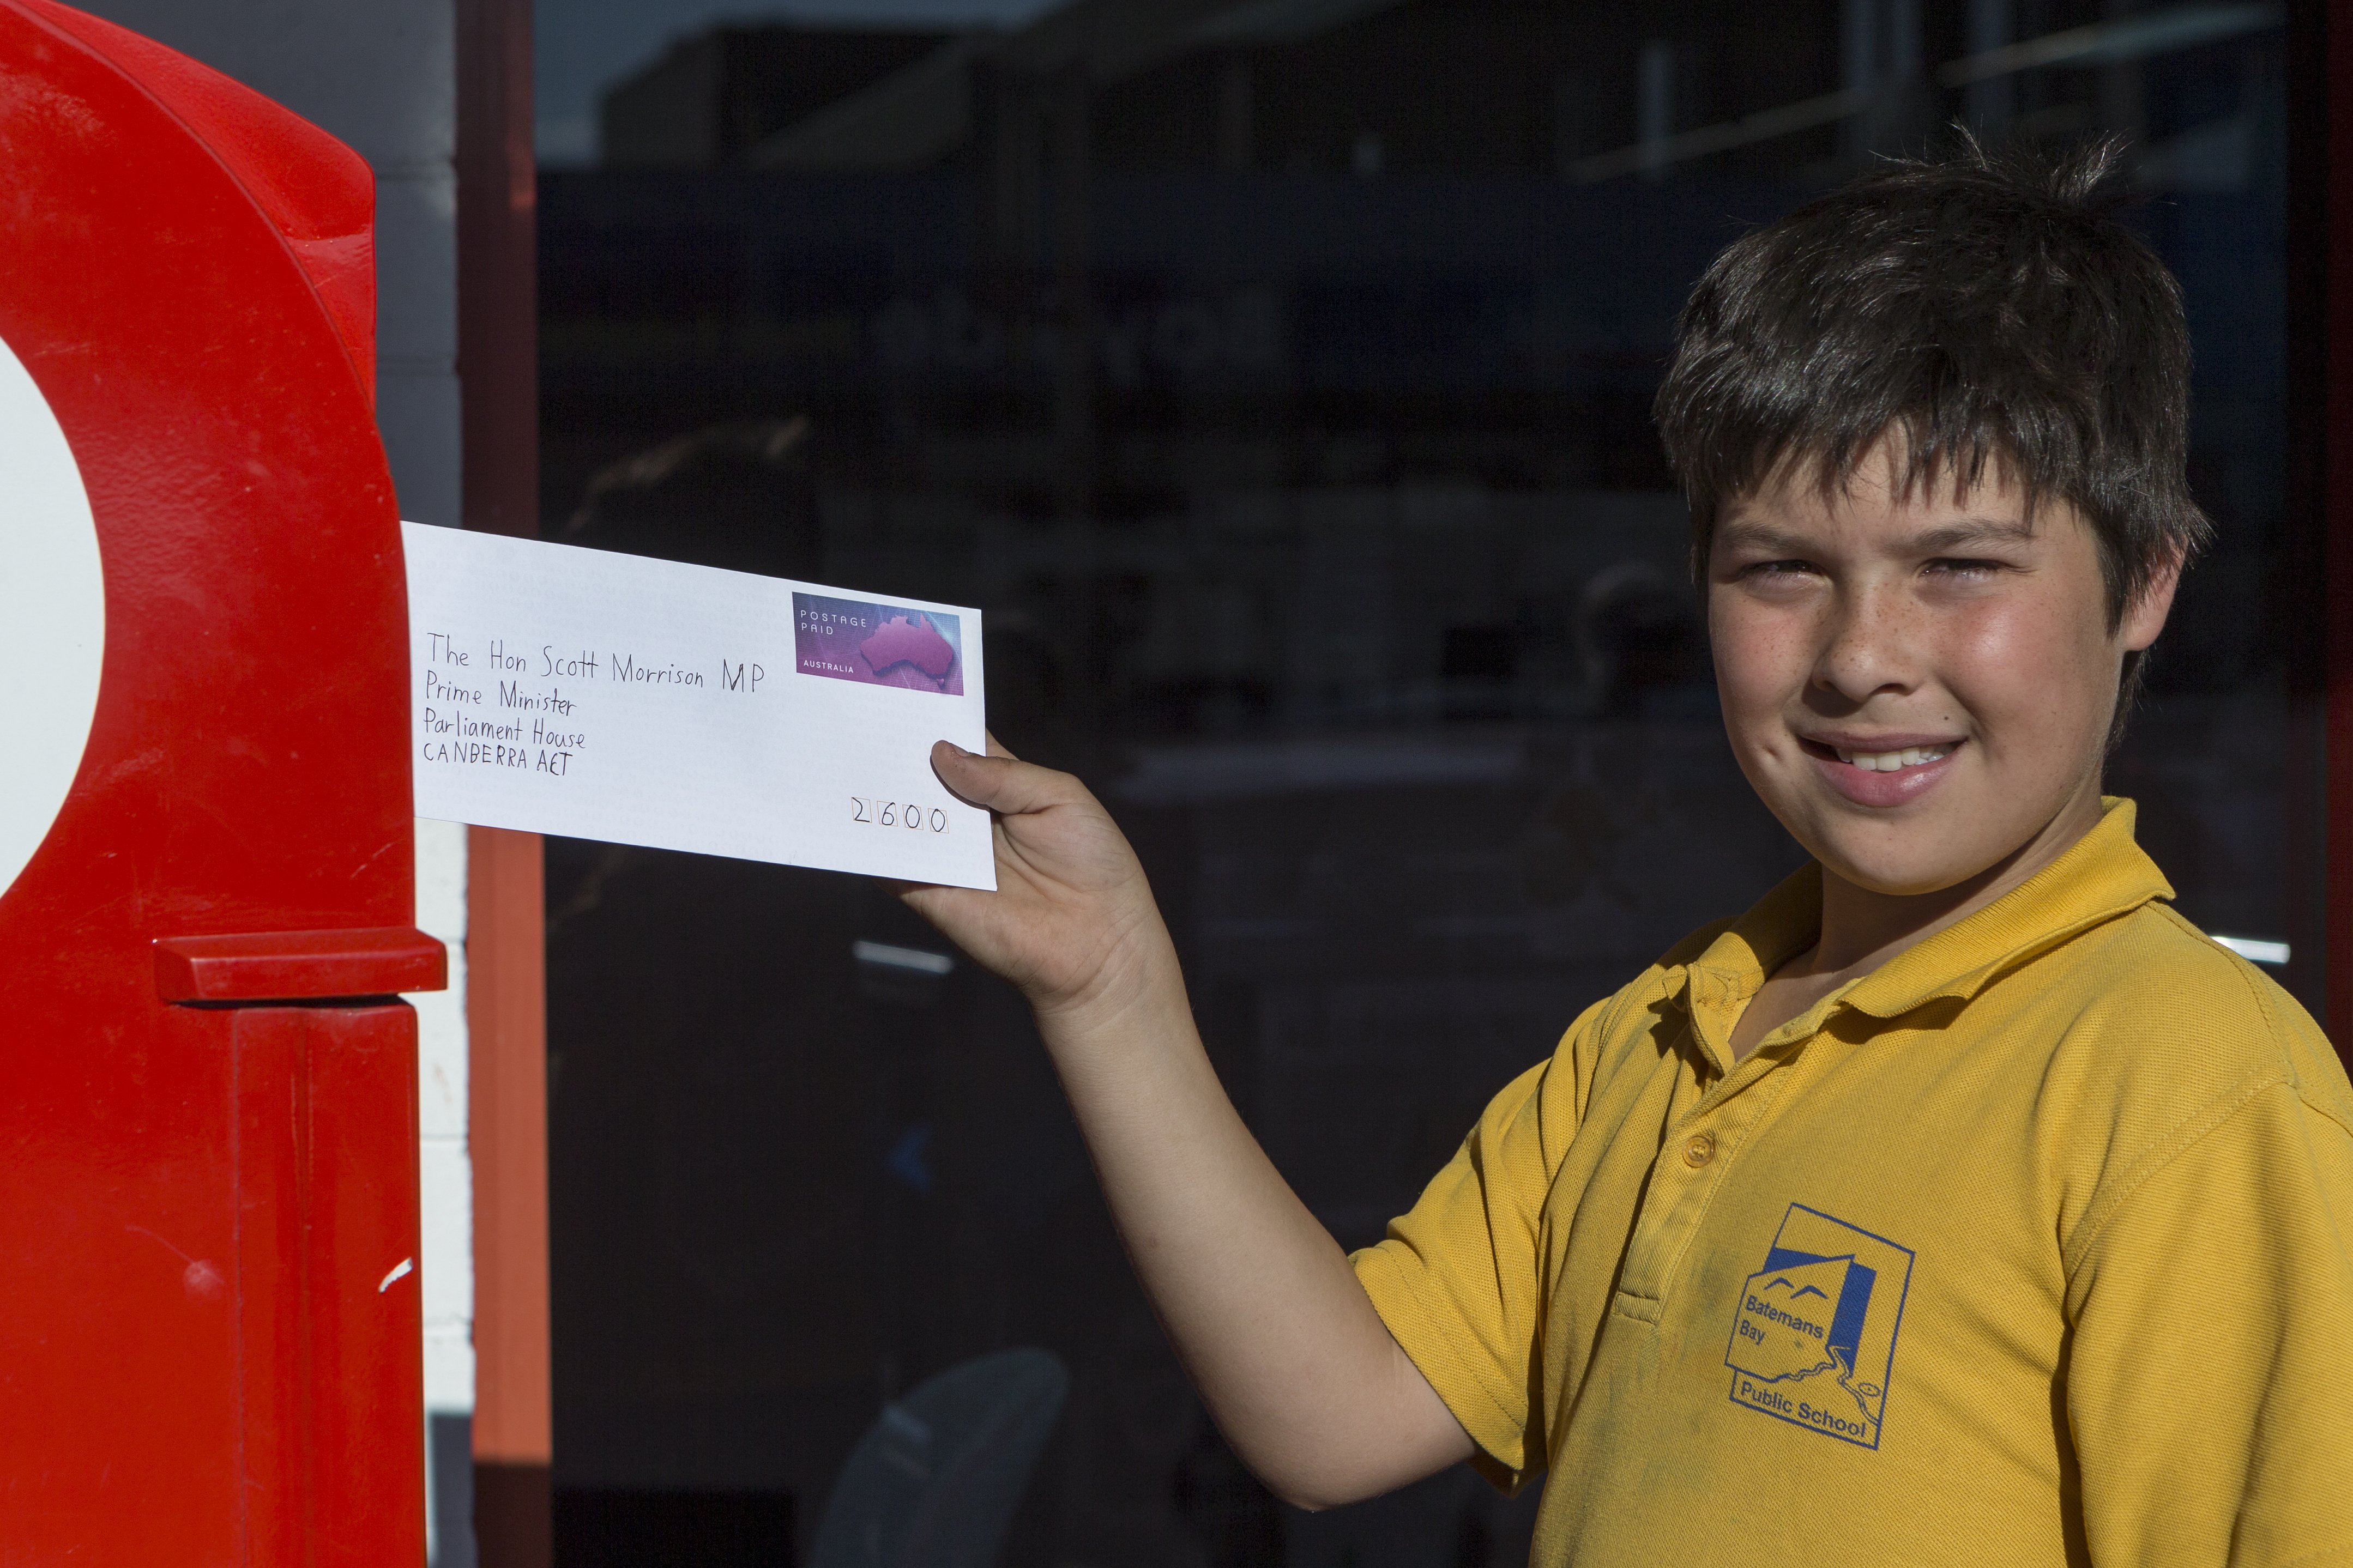 A message from a 10 year old Batemans Bay boy to Scott Morrison - 